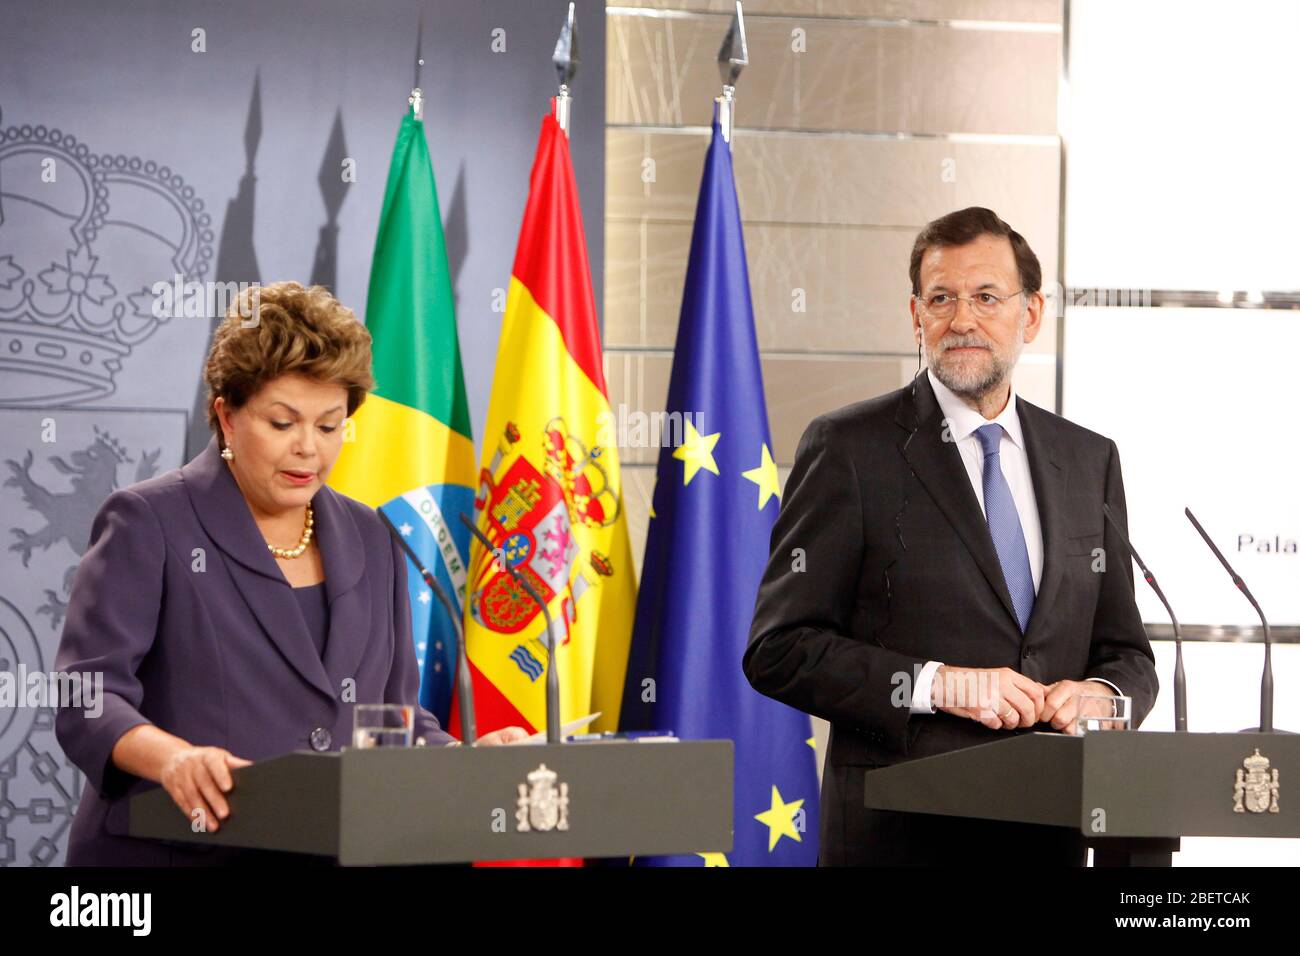 Spain's Prime Minister Mariano Rajoy and Brazil's President Dilma Rousseff during an official visit and press conference at La Moncloa palace. Novembe Stock Photo